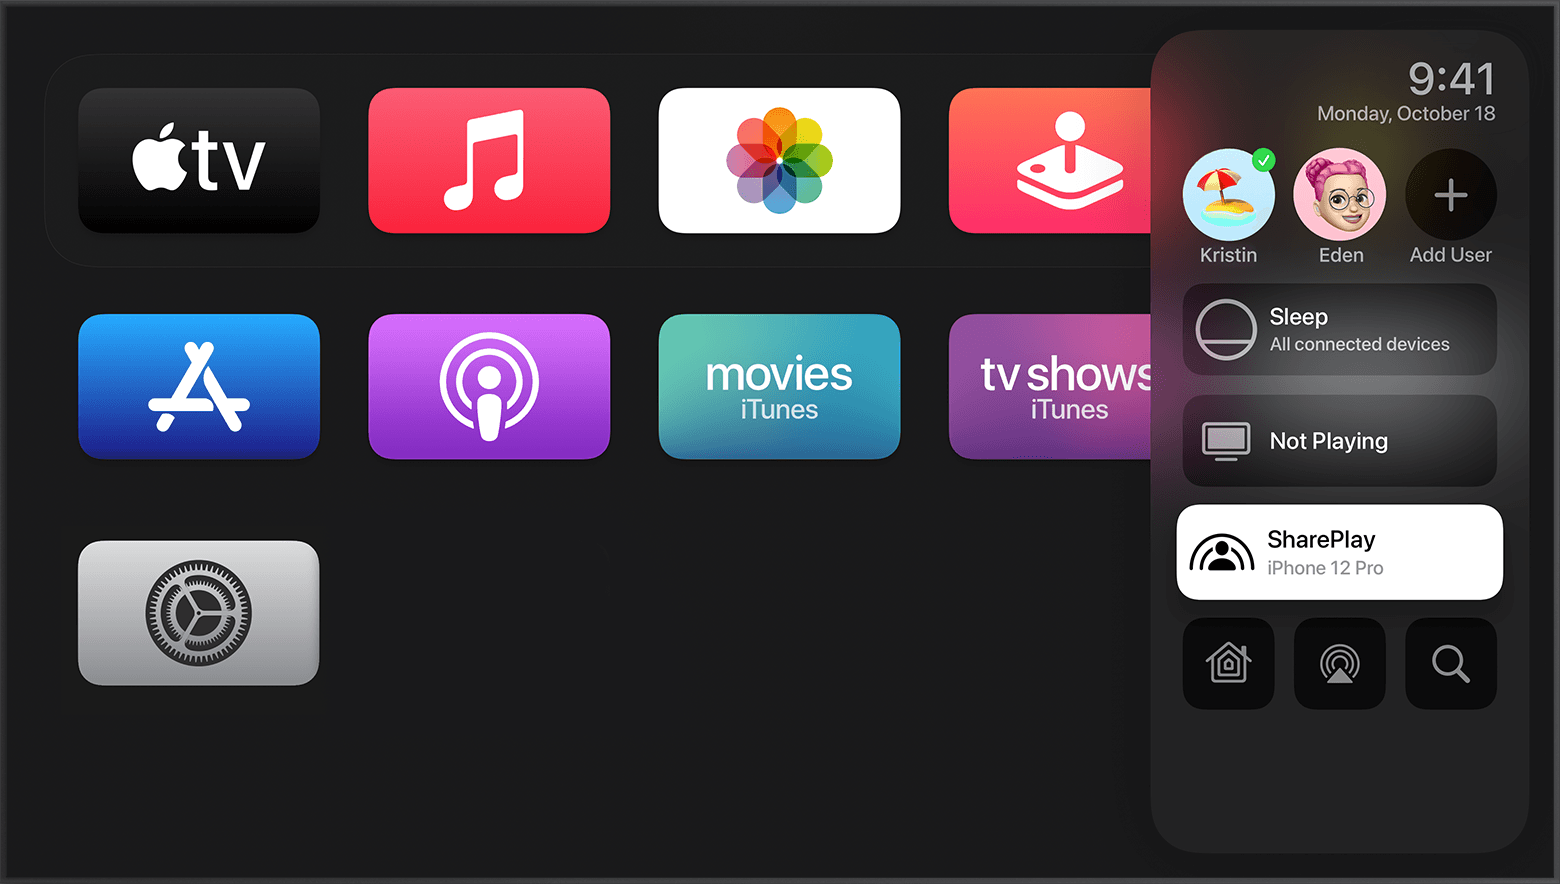 Use SharePlay to watch movies and TV shows together on your Apple TV - Apple  Support (GU)